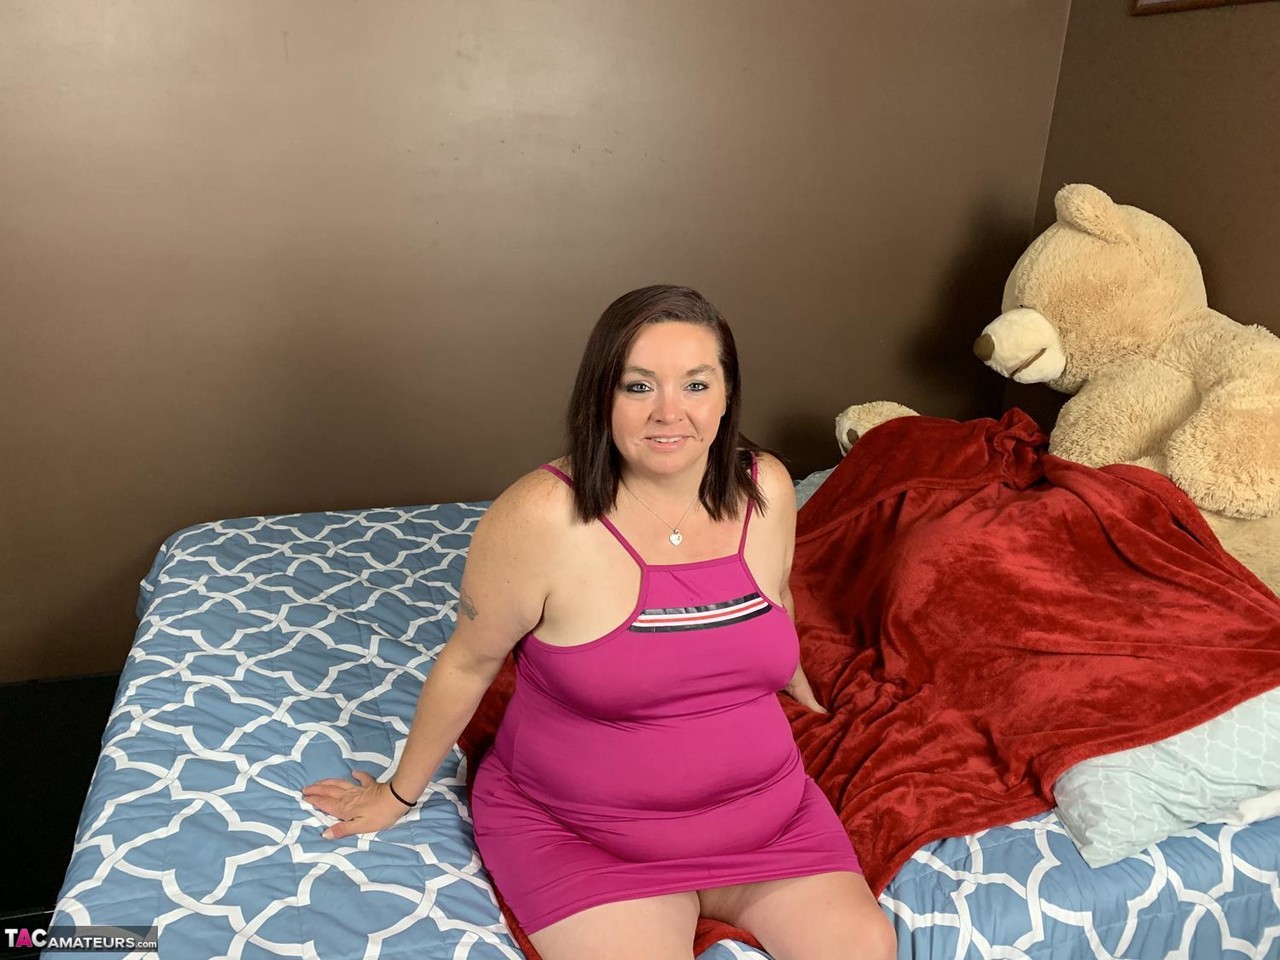 Mature BBW Sexy NE BBW spreads her pussy on a bed after showing her big ass photo porno #422697951 | TAC Amateurs Pics, Sexy NE BBW, BBW, porno mobile